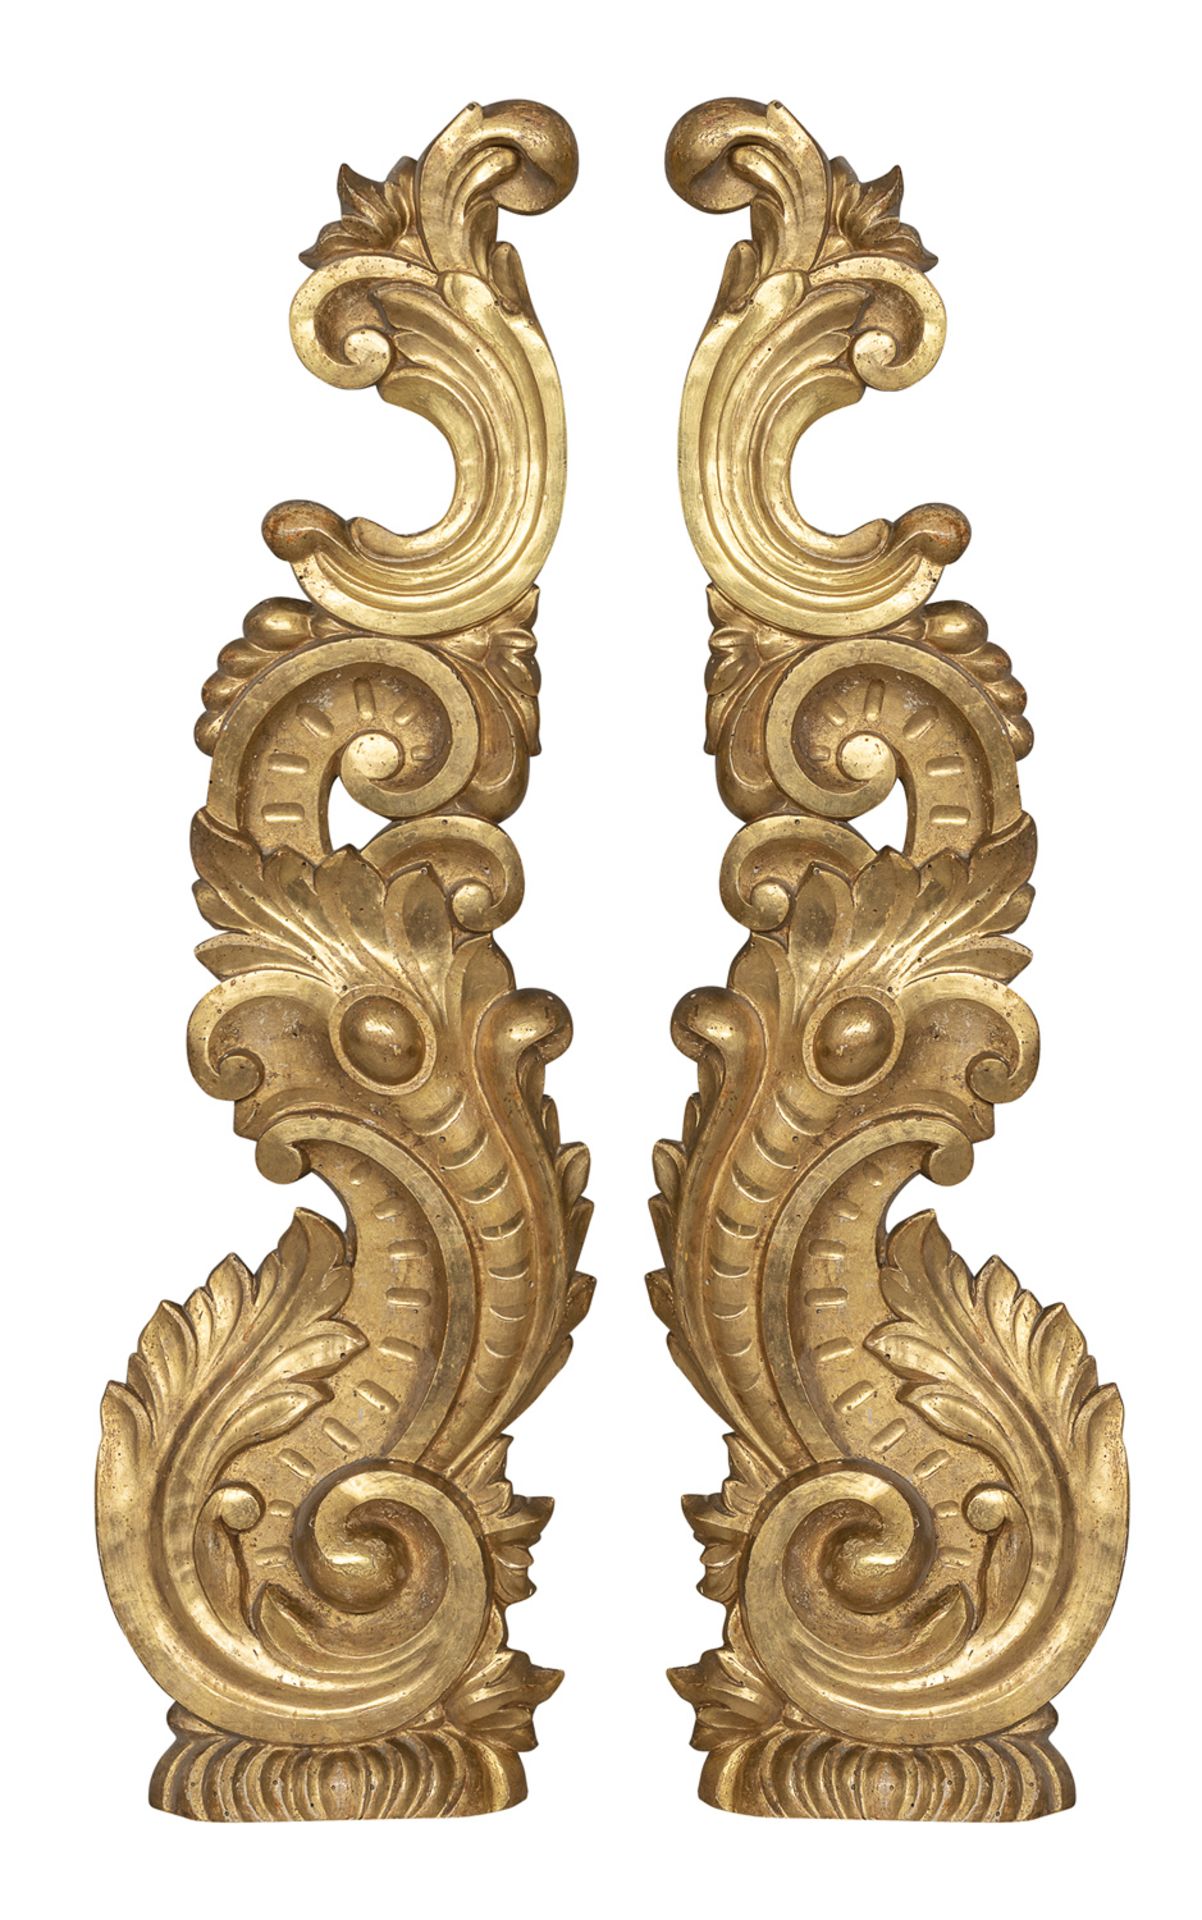 PAIR OF FRIEZES IN GILTWOOD 18th CENTURY